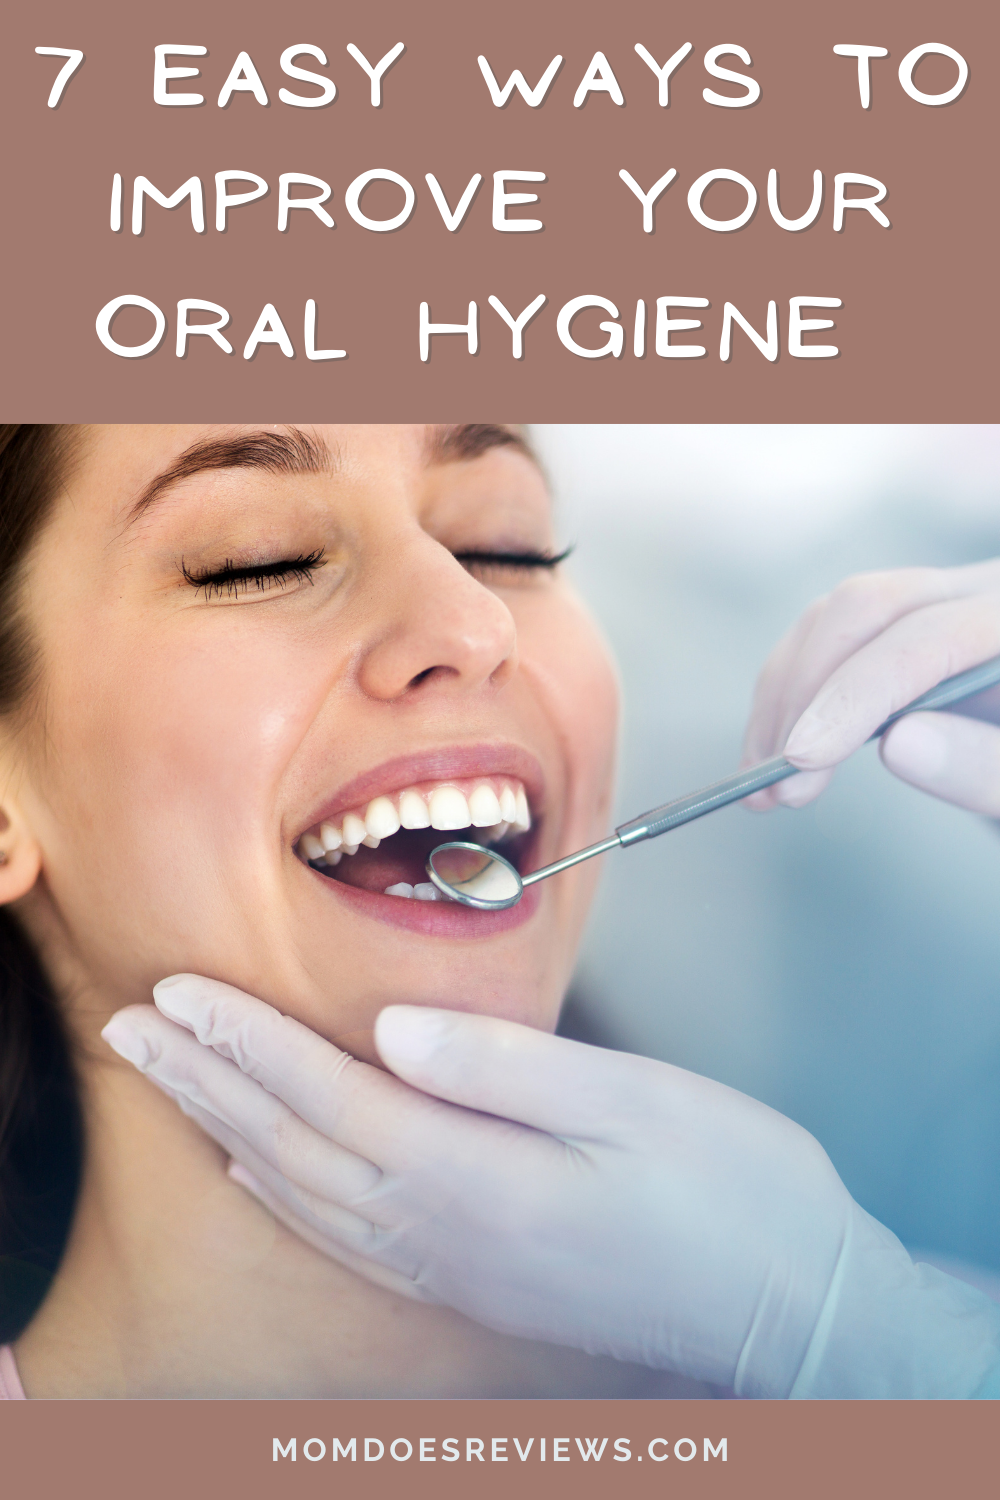 7 Easy Ways To Improve Your Oral Hygiene